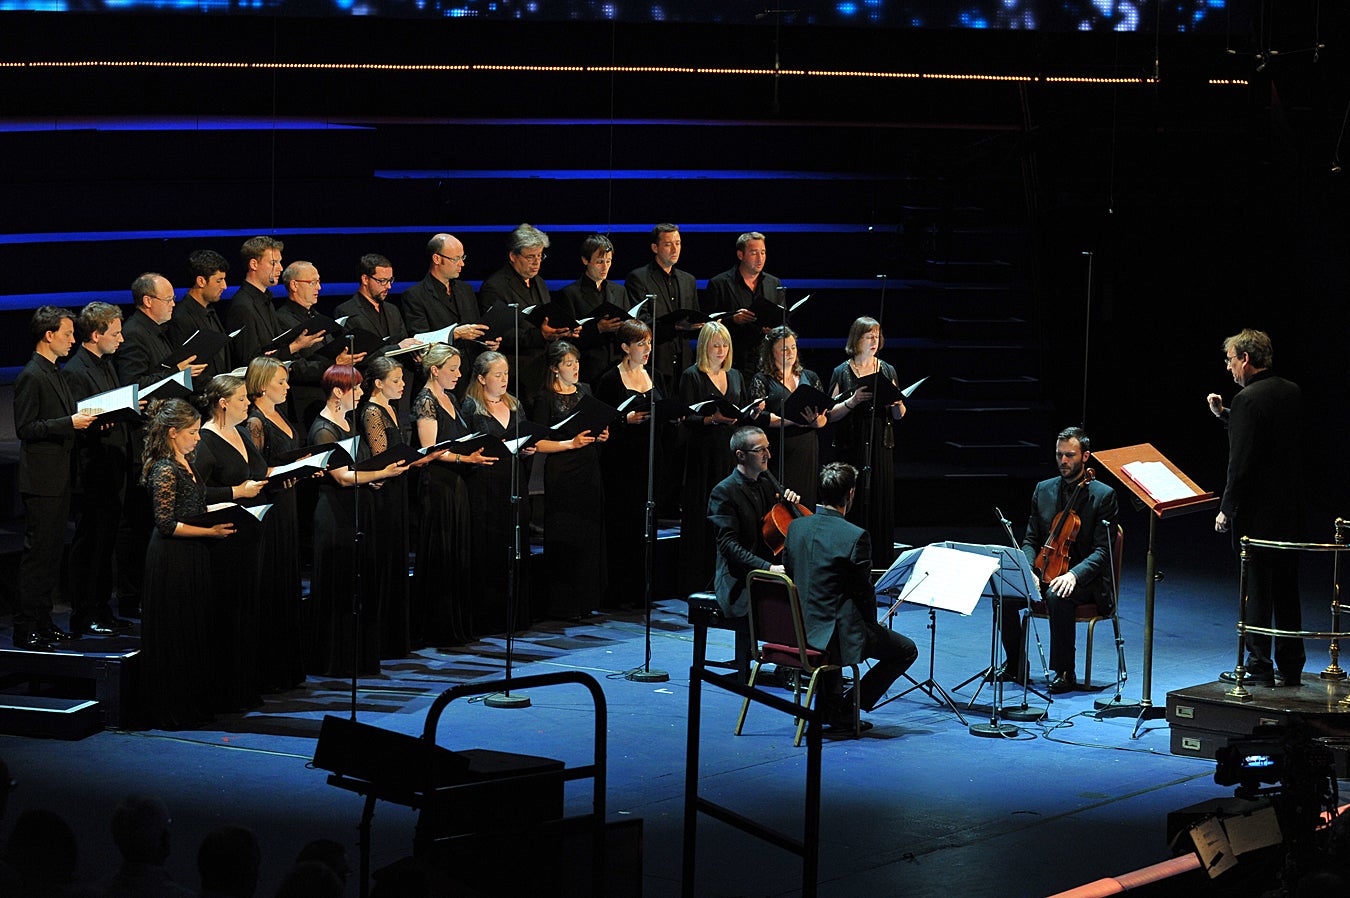 Peter Phillips, the Tallis Scholars and members of the Heath Quartet at the Proms. Photo: Chris Christodoulou